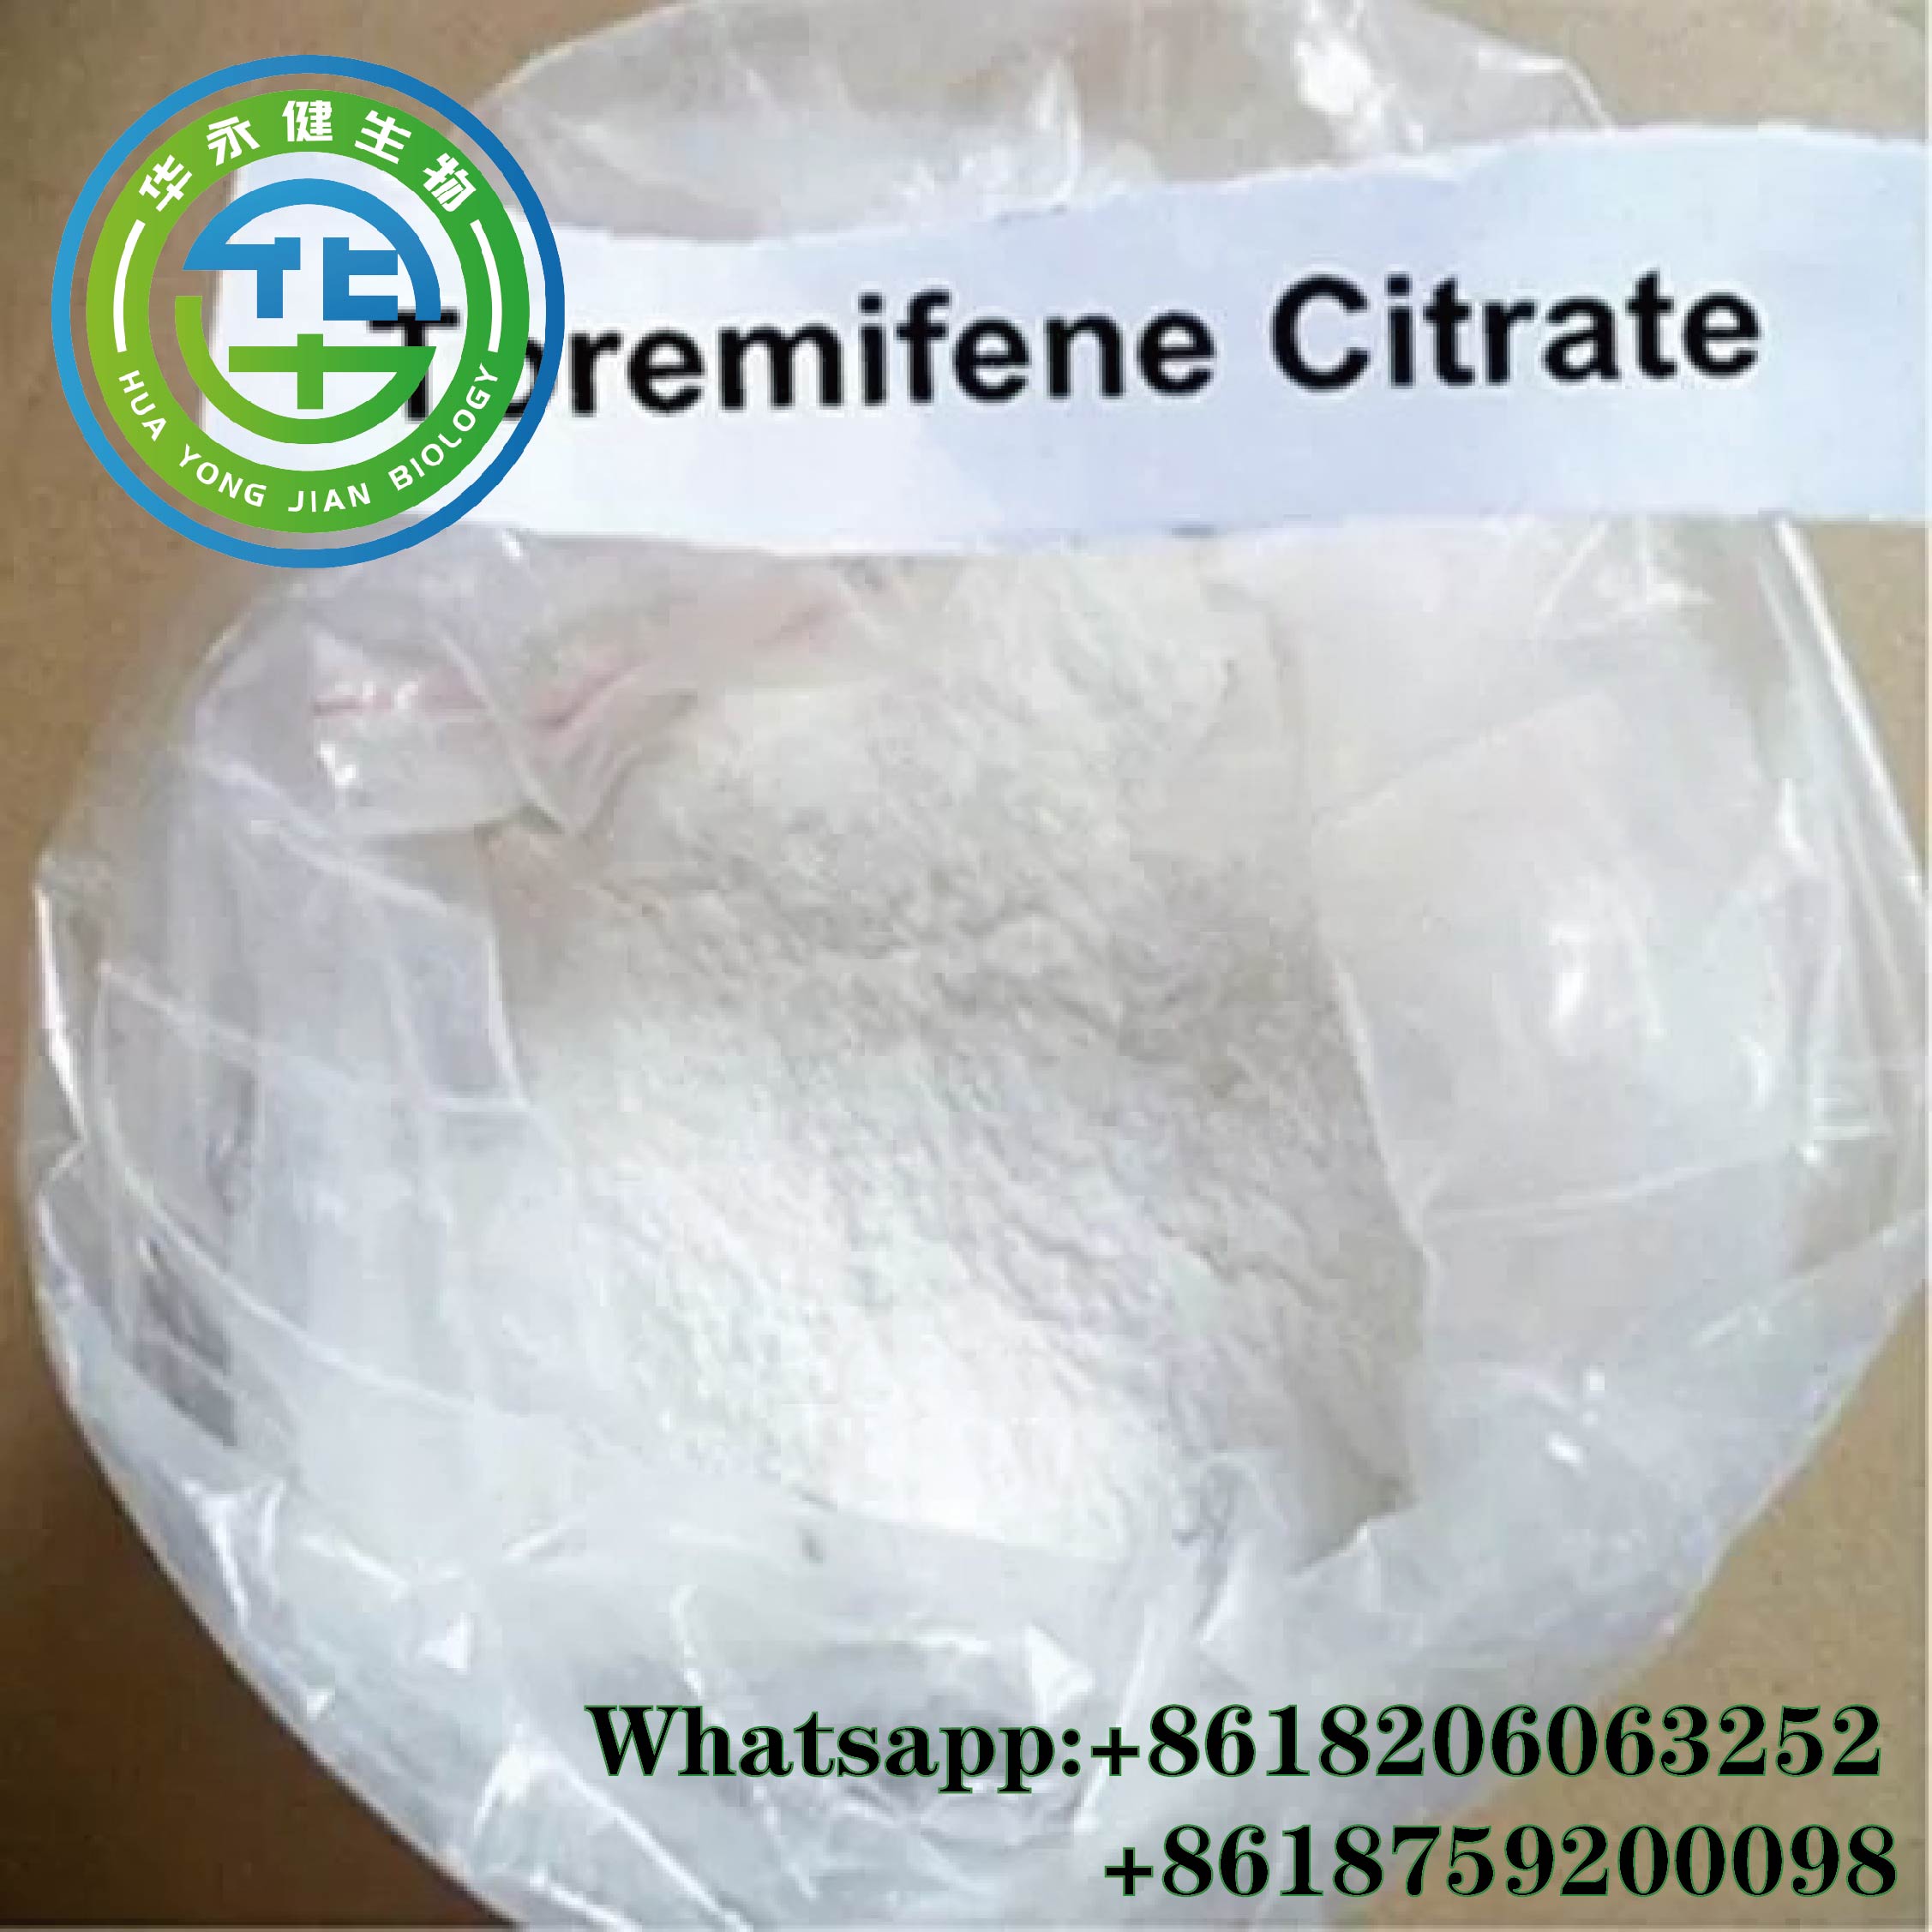 Toremifene Citrate Factory Supply 99% Fareston Powder with Resending Policy CasNO.89778-27-8